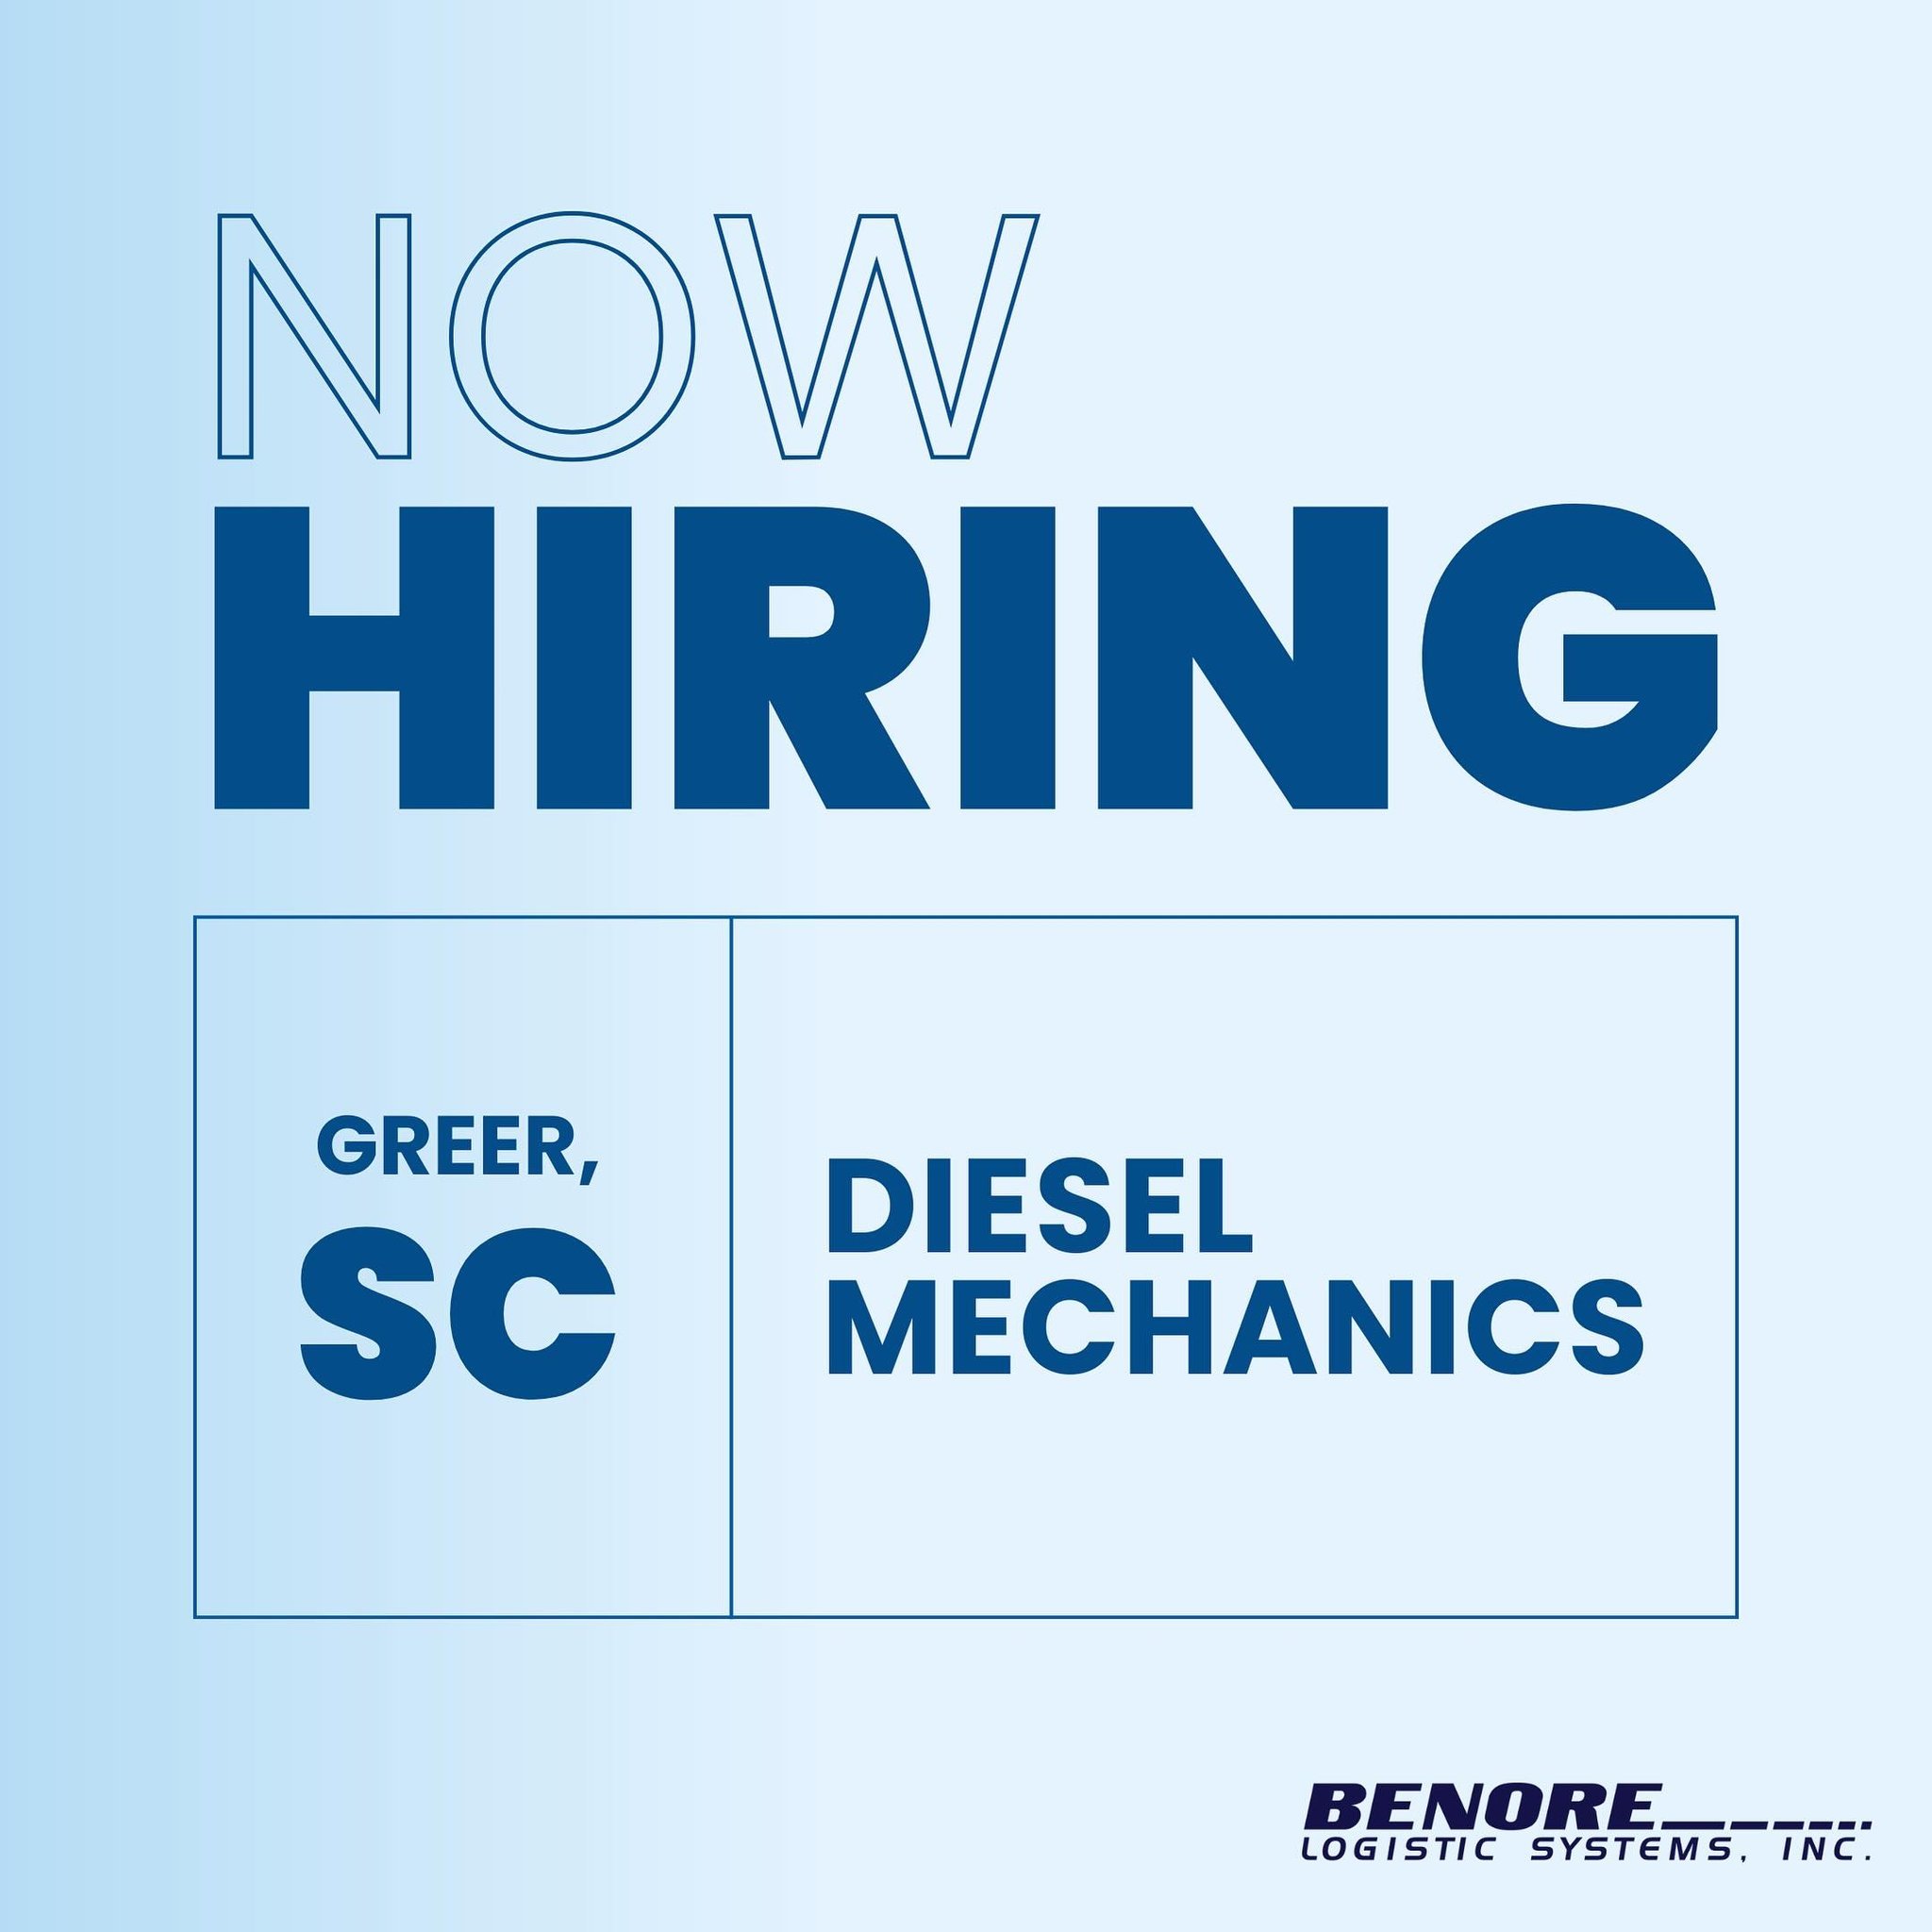 Join our Maintenance Team in Greer, South Carolina! 🛠️ 

As a Diesel Technician, you&rsquo;ll keep our truck fleet running smoothly and safely on the road. Enjoy perks like a $2,500 sign-on bonus, competitive pay (up to $40/hour), flexible schedules